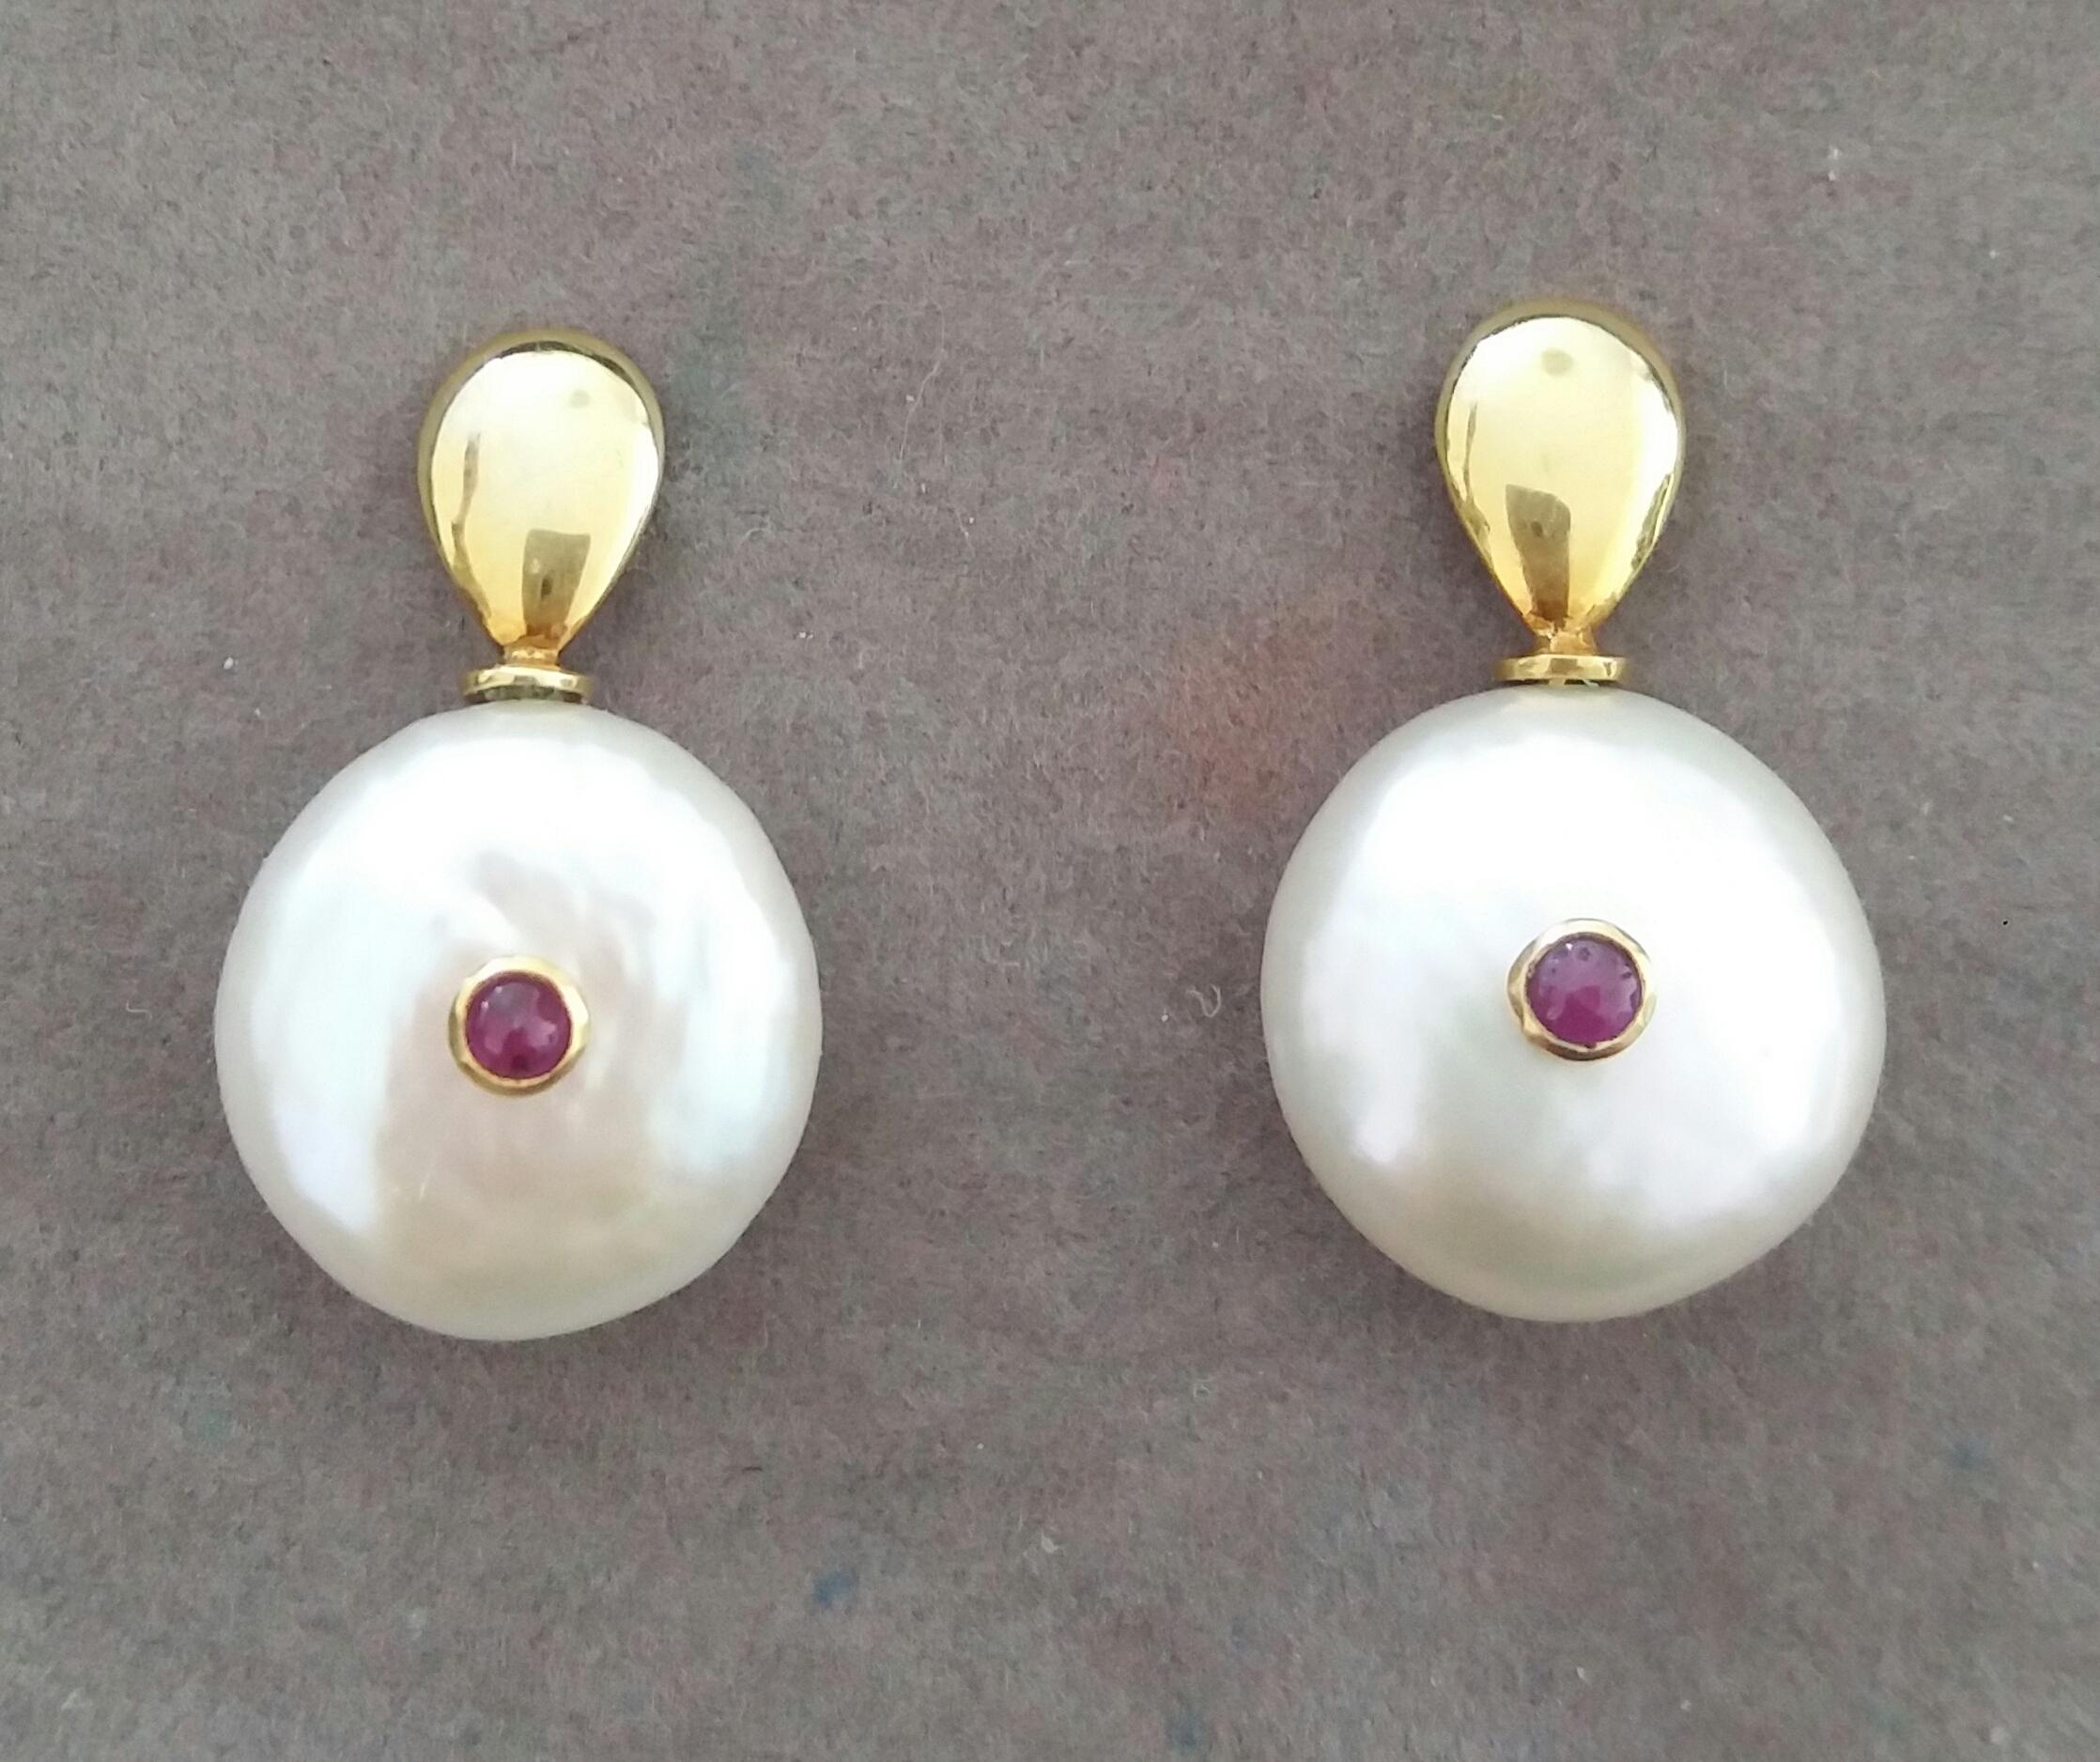  Simple and elegant earrings consisting in 2  Button Shape white color and high luster Baroque Pearls measuring about 17 mm in diameter with in the center 2 small round Ruby cabs set in 14 kt yellow gold suspended from 2 plain yellow gold elements